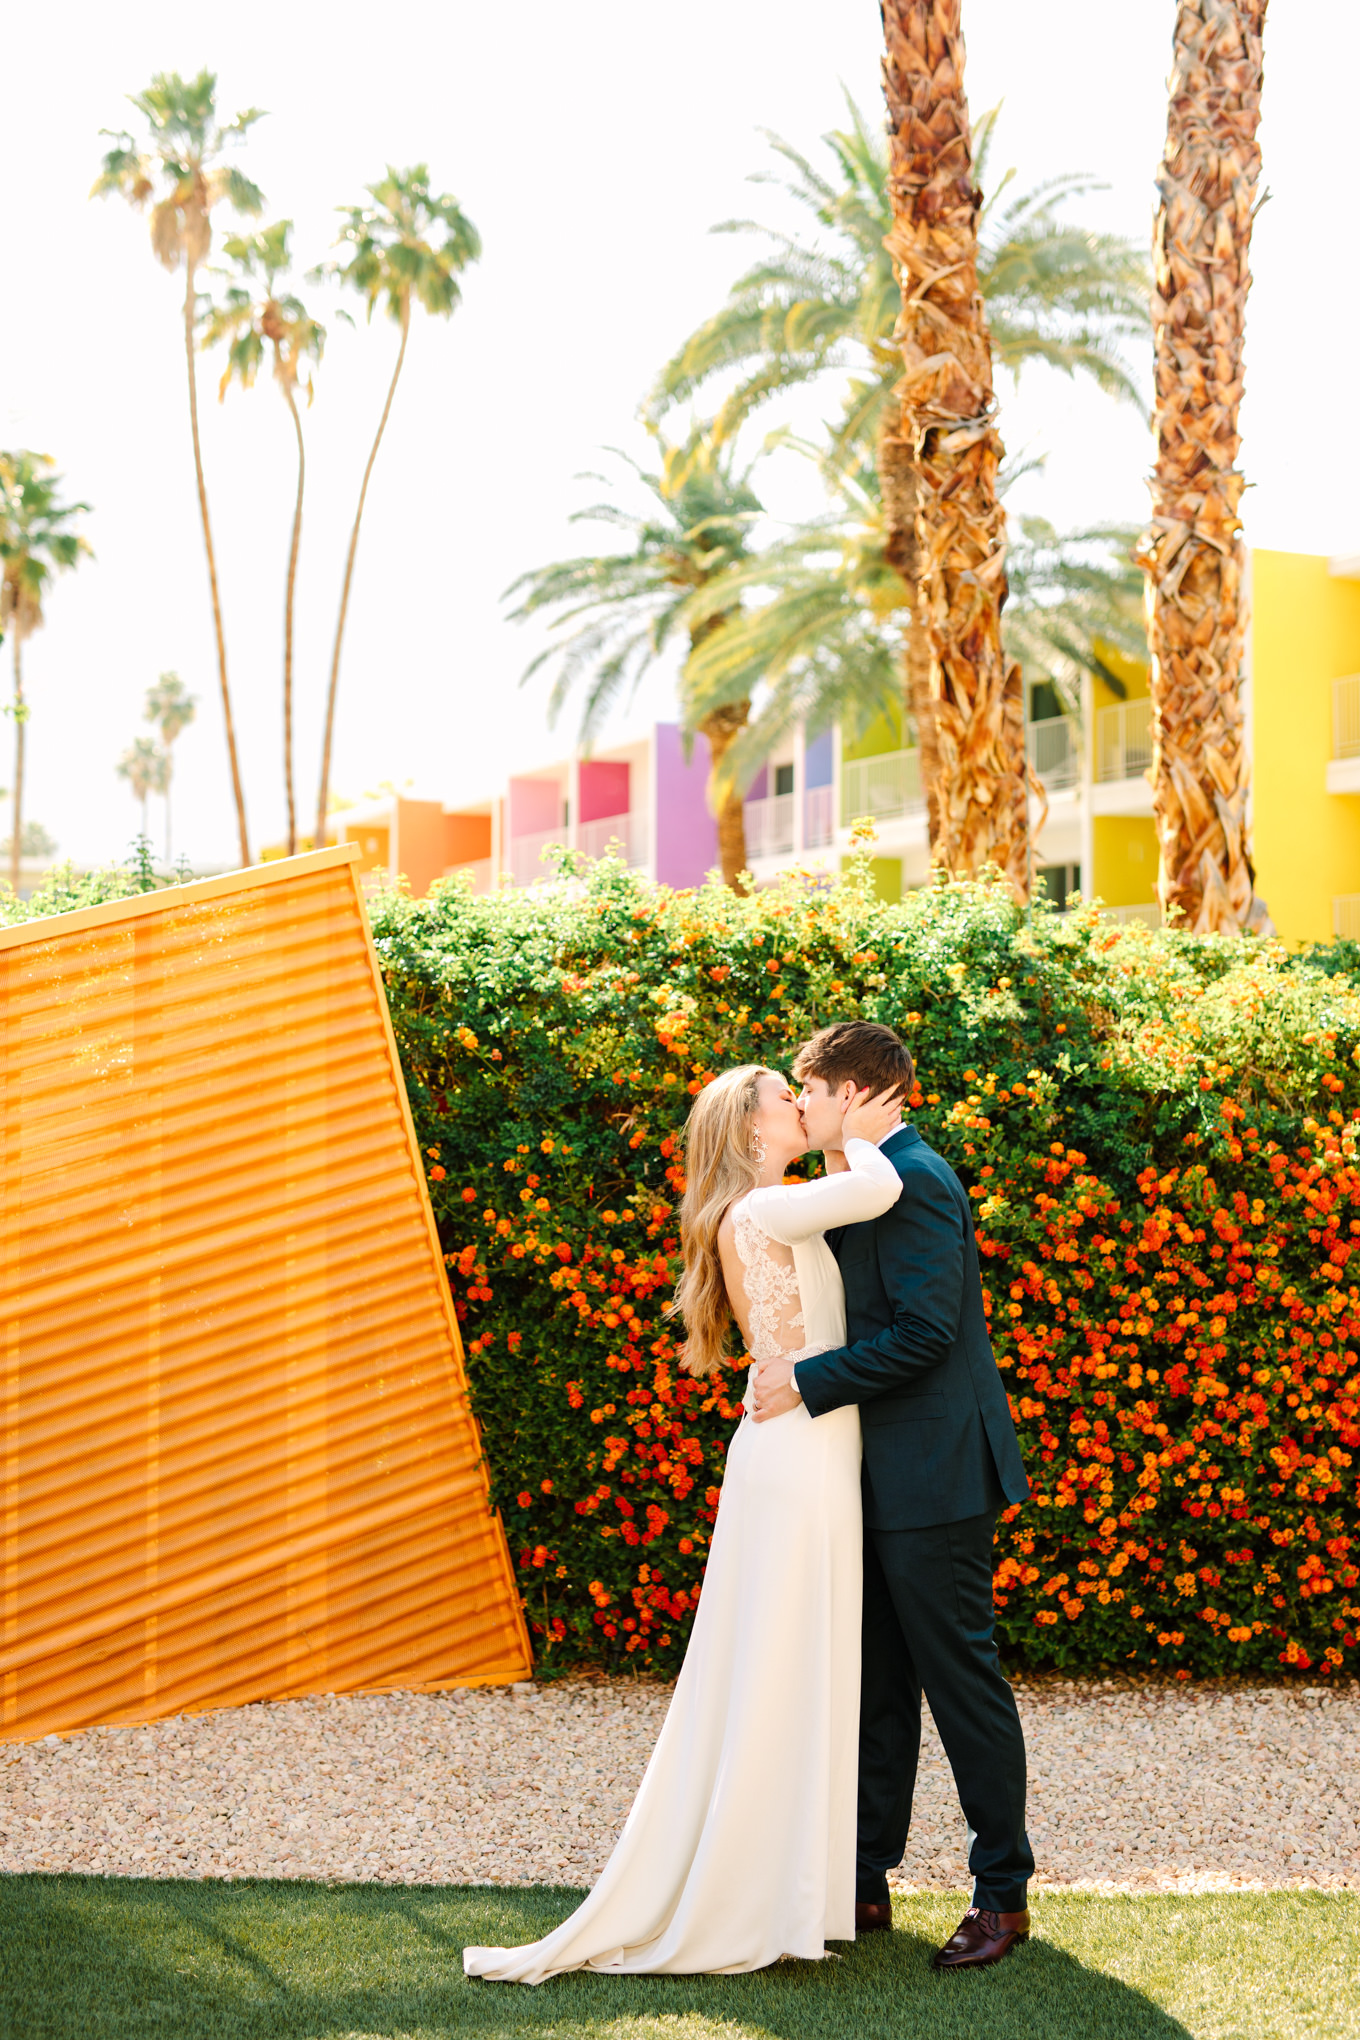 First kiss during wedding ceremony at Saguaro Palm Springs | Colorful jewel tone Palm Springs elopement | Fresh and colorful photography for fun-loving couples in Southern California | #colorfulelopement #palmspringselopement #elopementphotography #palmspringswedding Source: Mary Costa Photography | Los Angeles